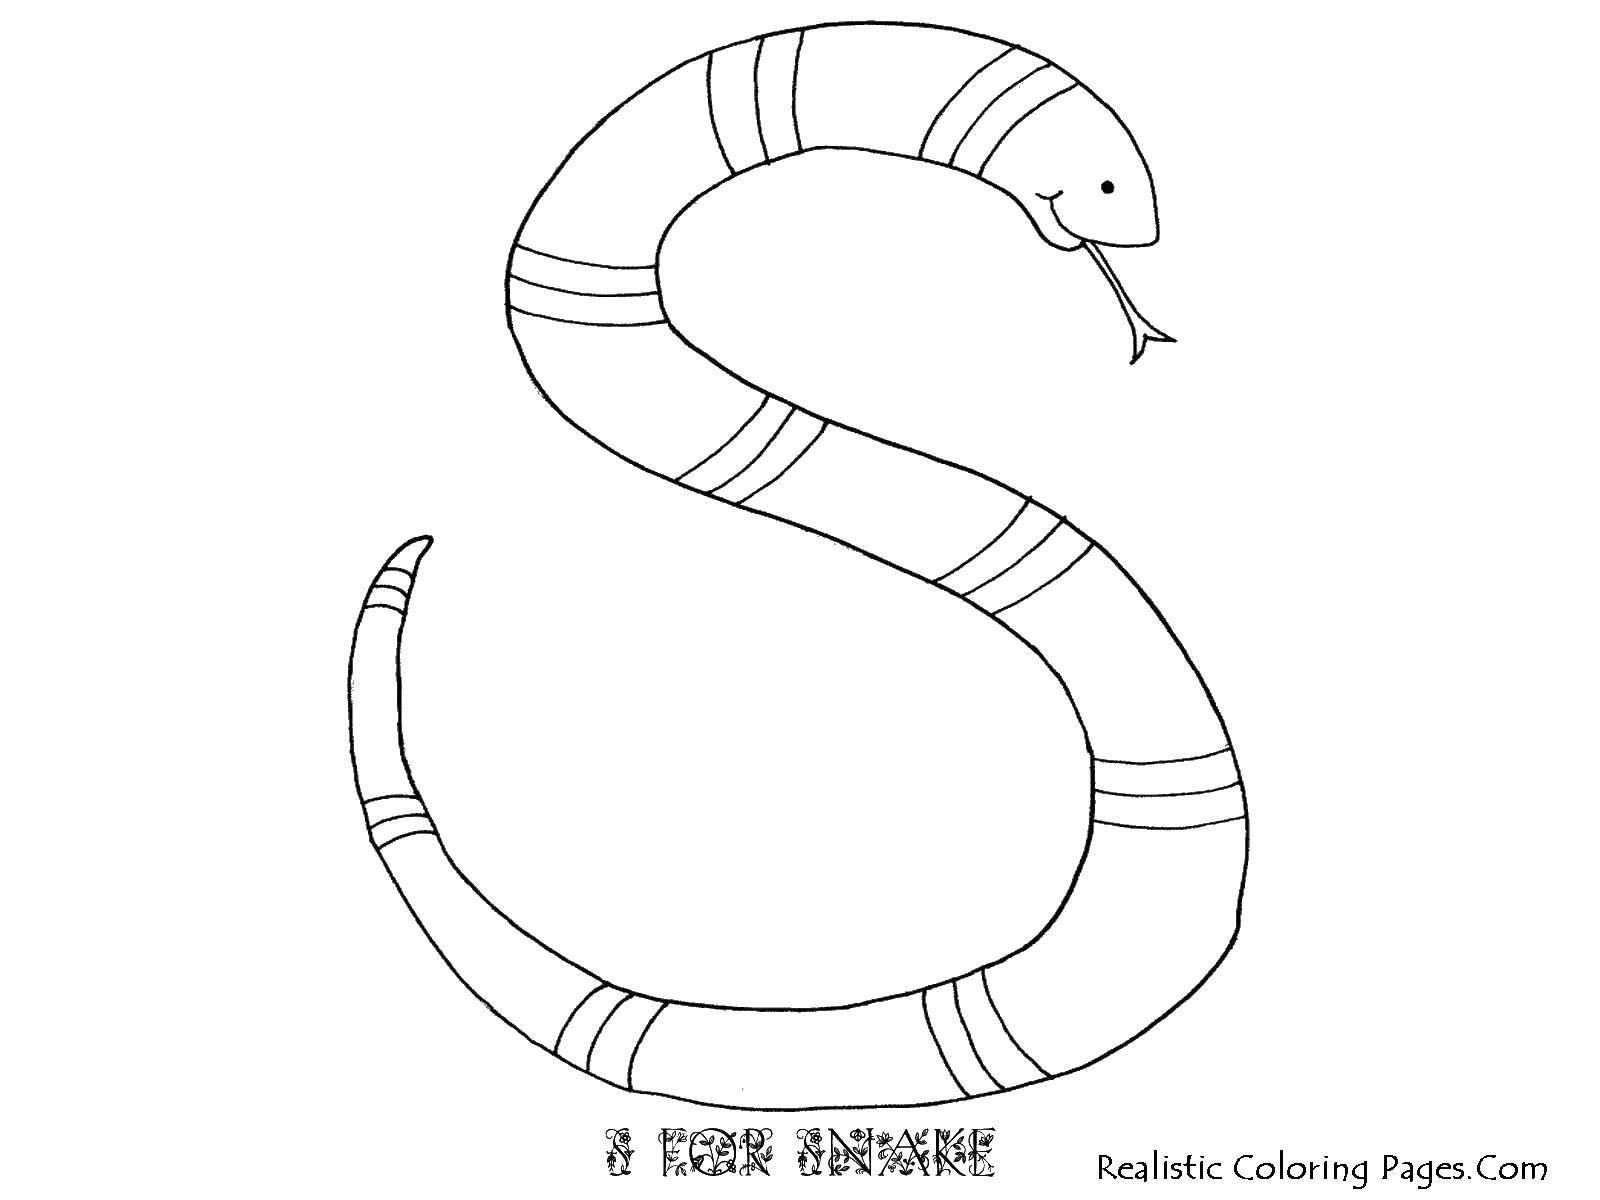 Coloring The letter s in the shape of a snake. Category the alphabet. Tags:  letter, snake, language.